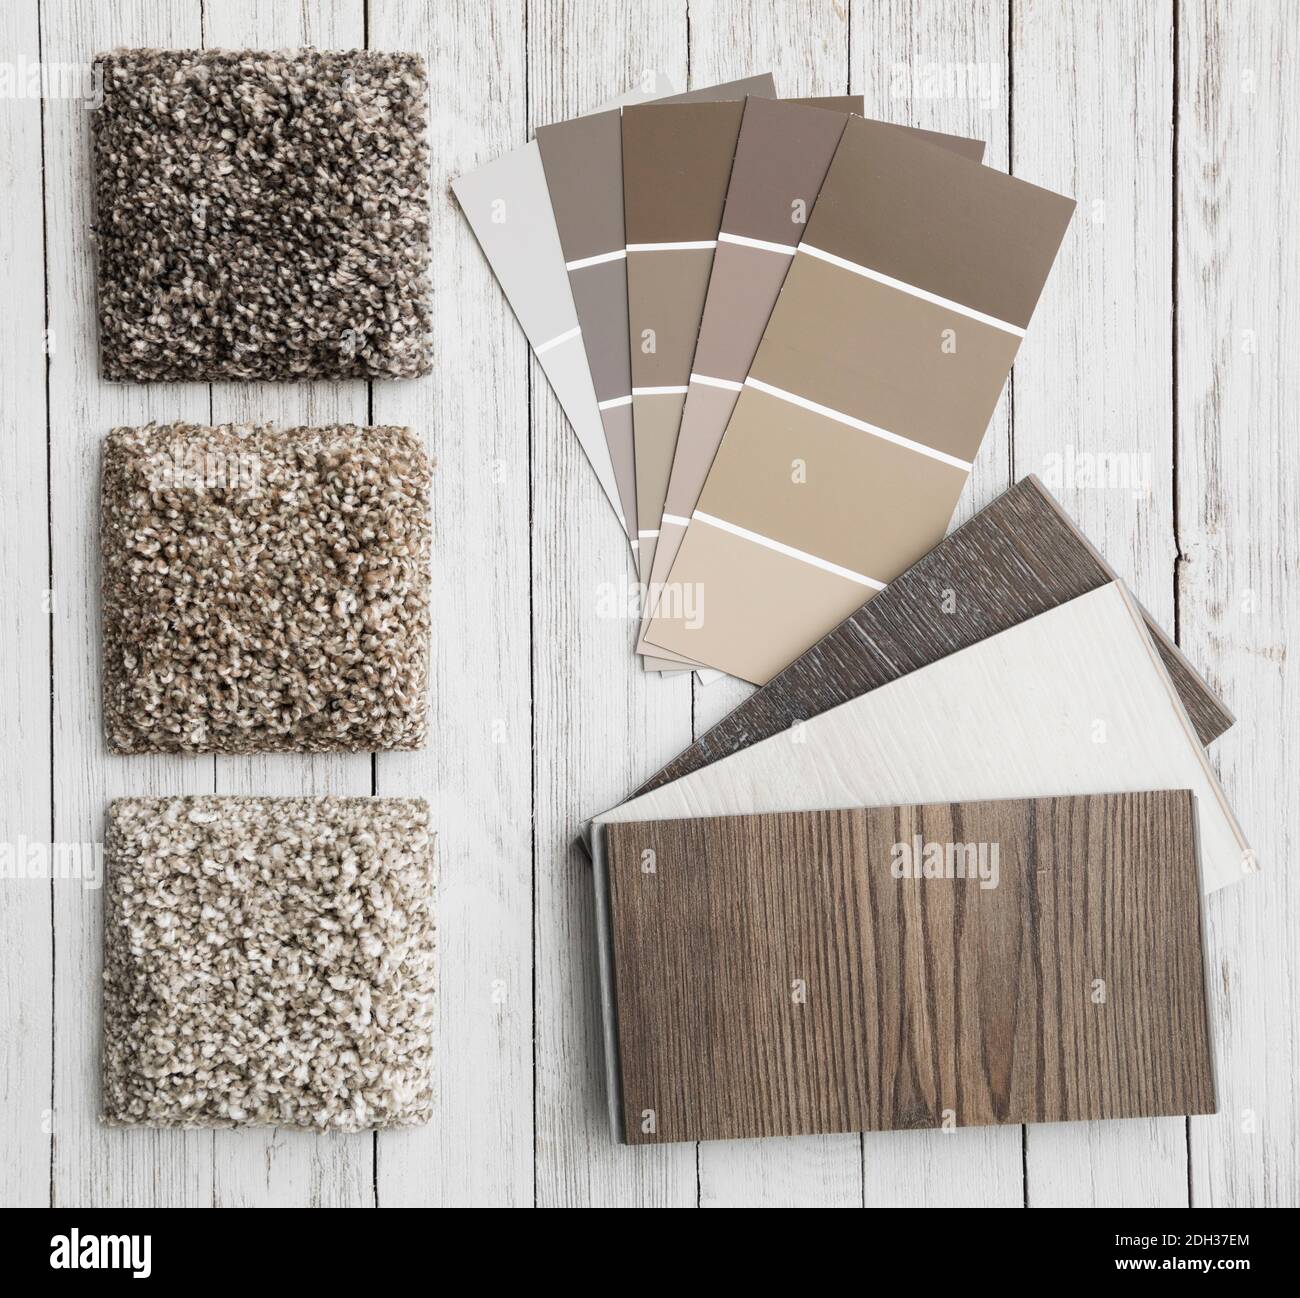 Samples for interior decorating laying on white wood Stock Photo